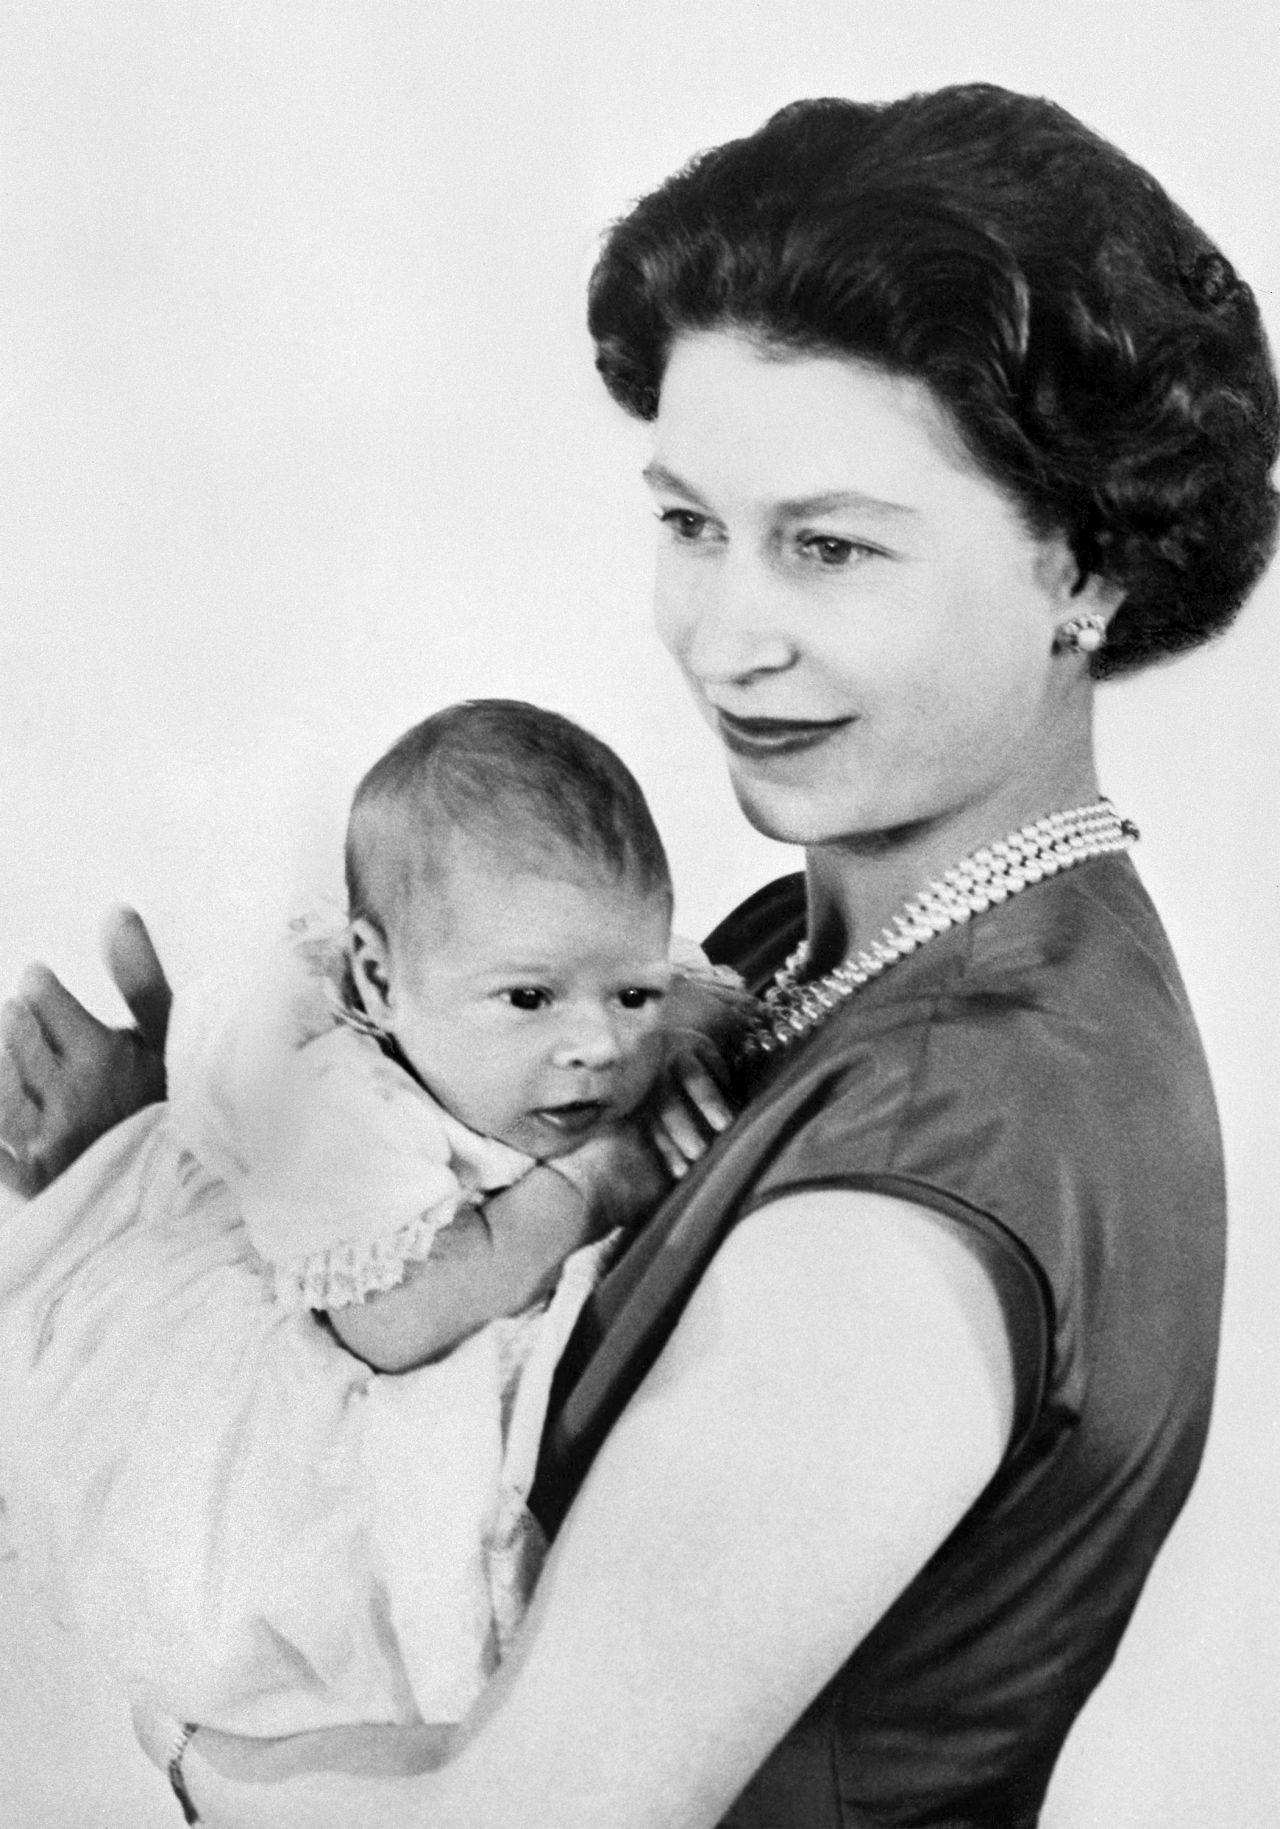 Prince Andrew was born February 19, 1960, as the second son to Queen Elizabeth II and Prince Philip.